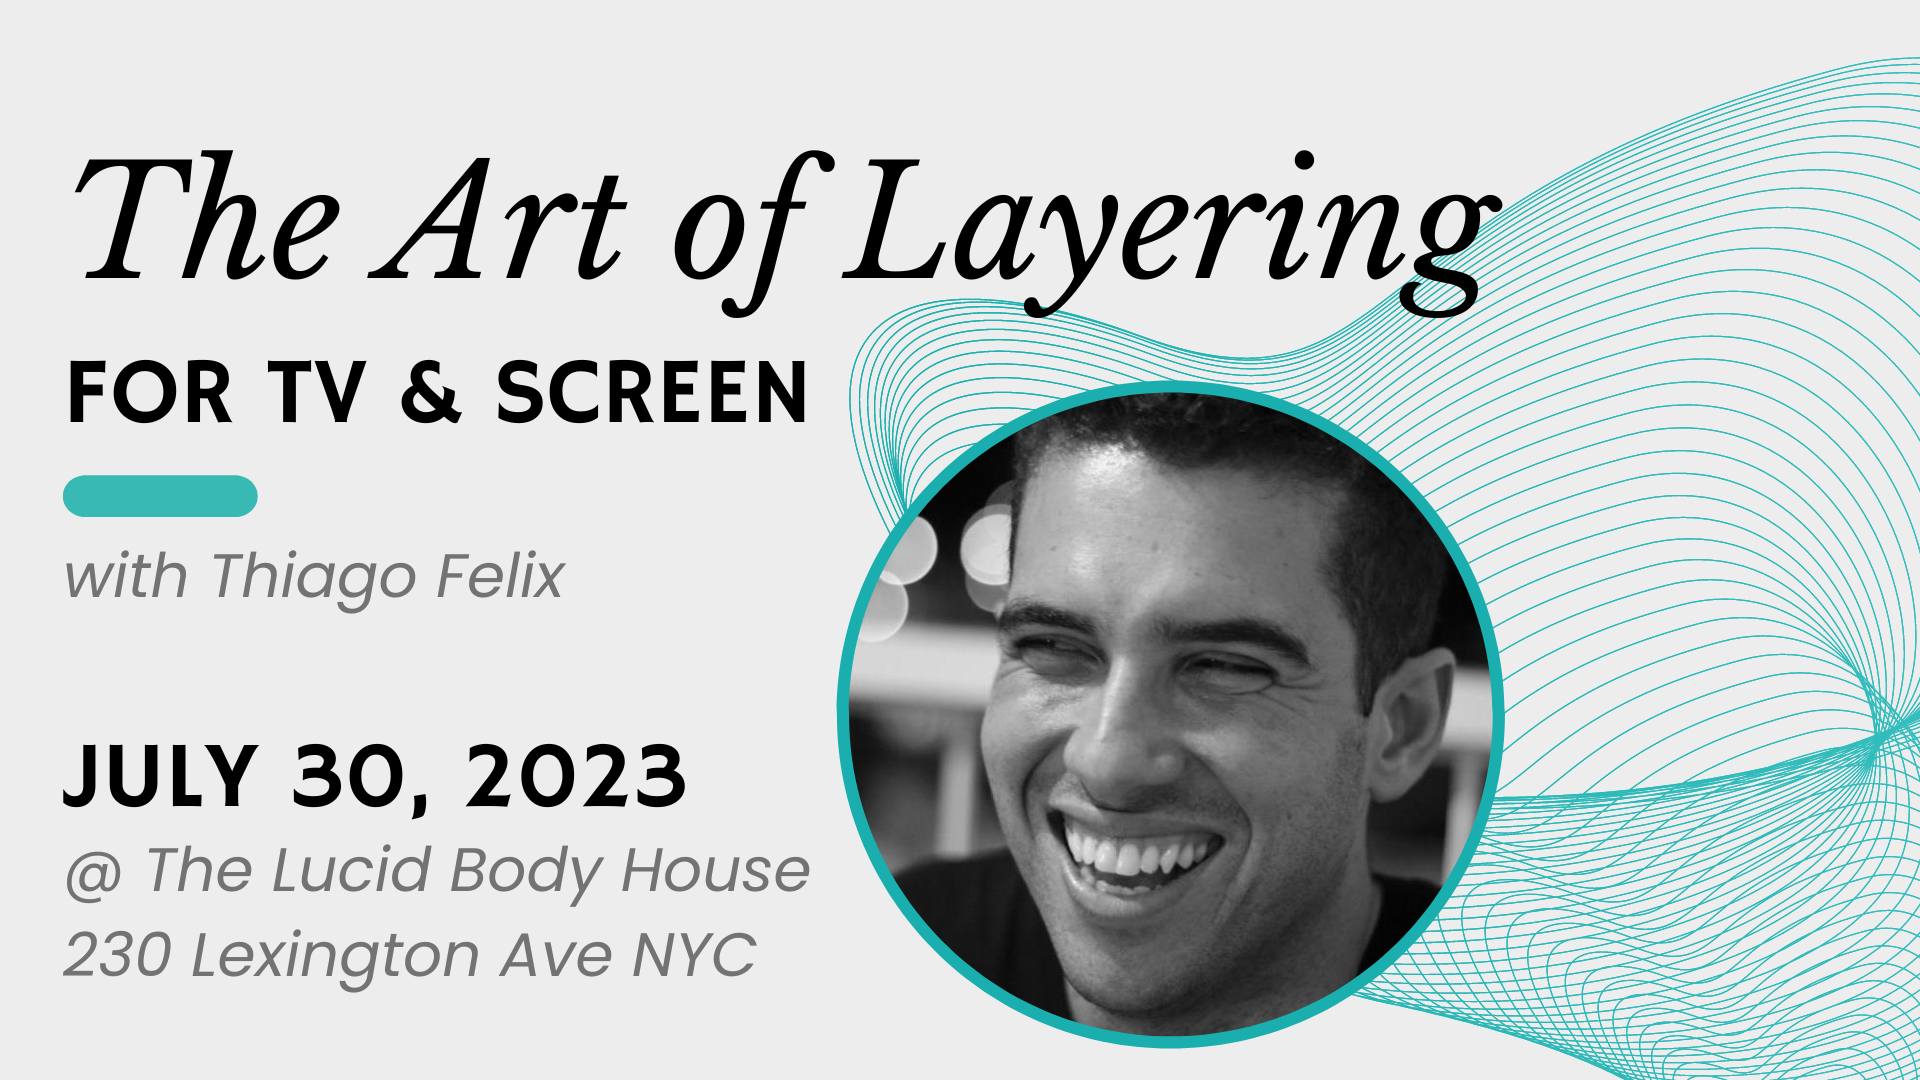 Art of Layering for TV & Screen July 30, 2023